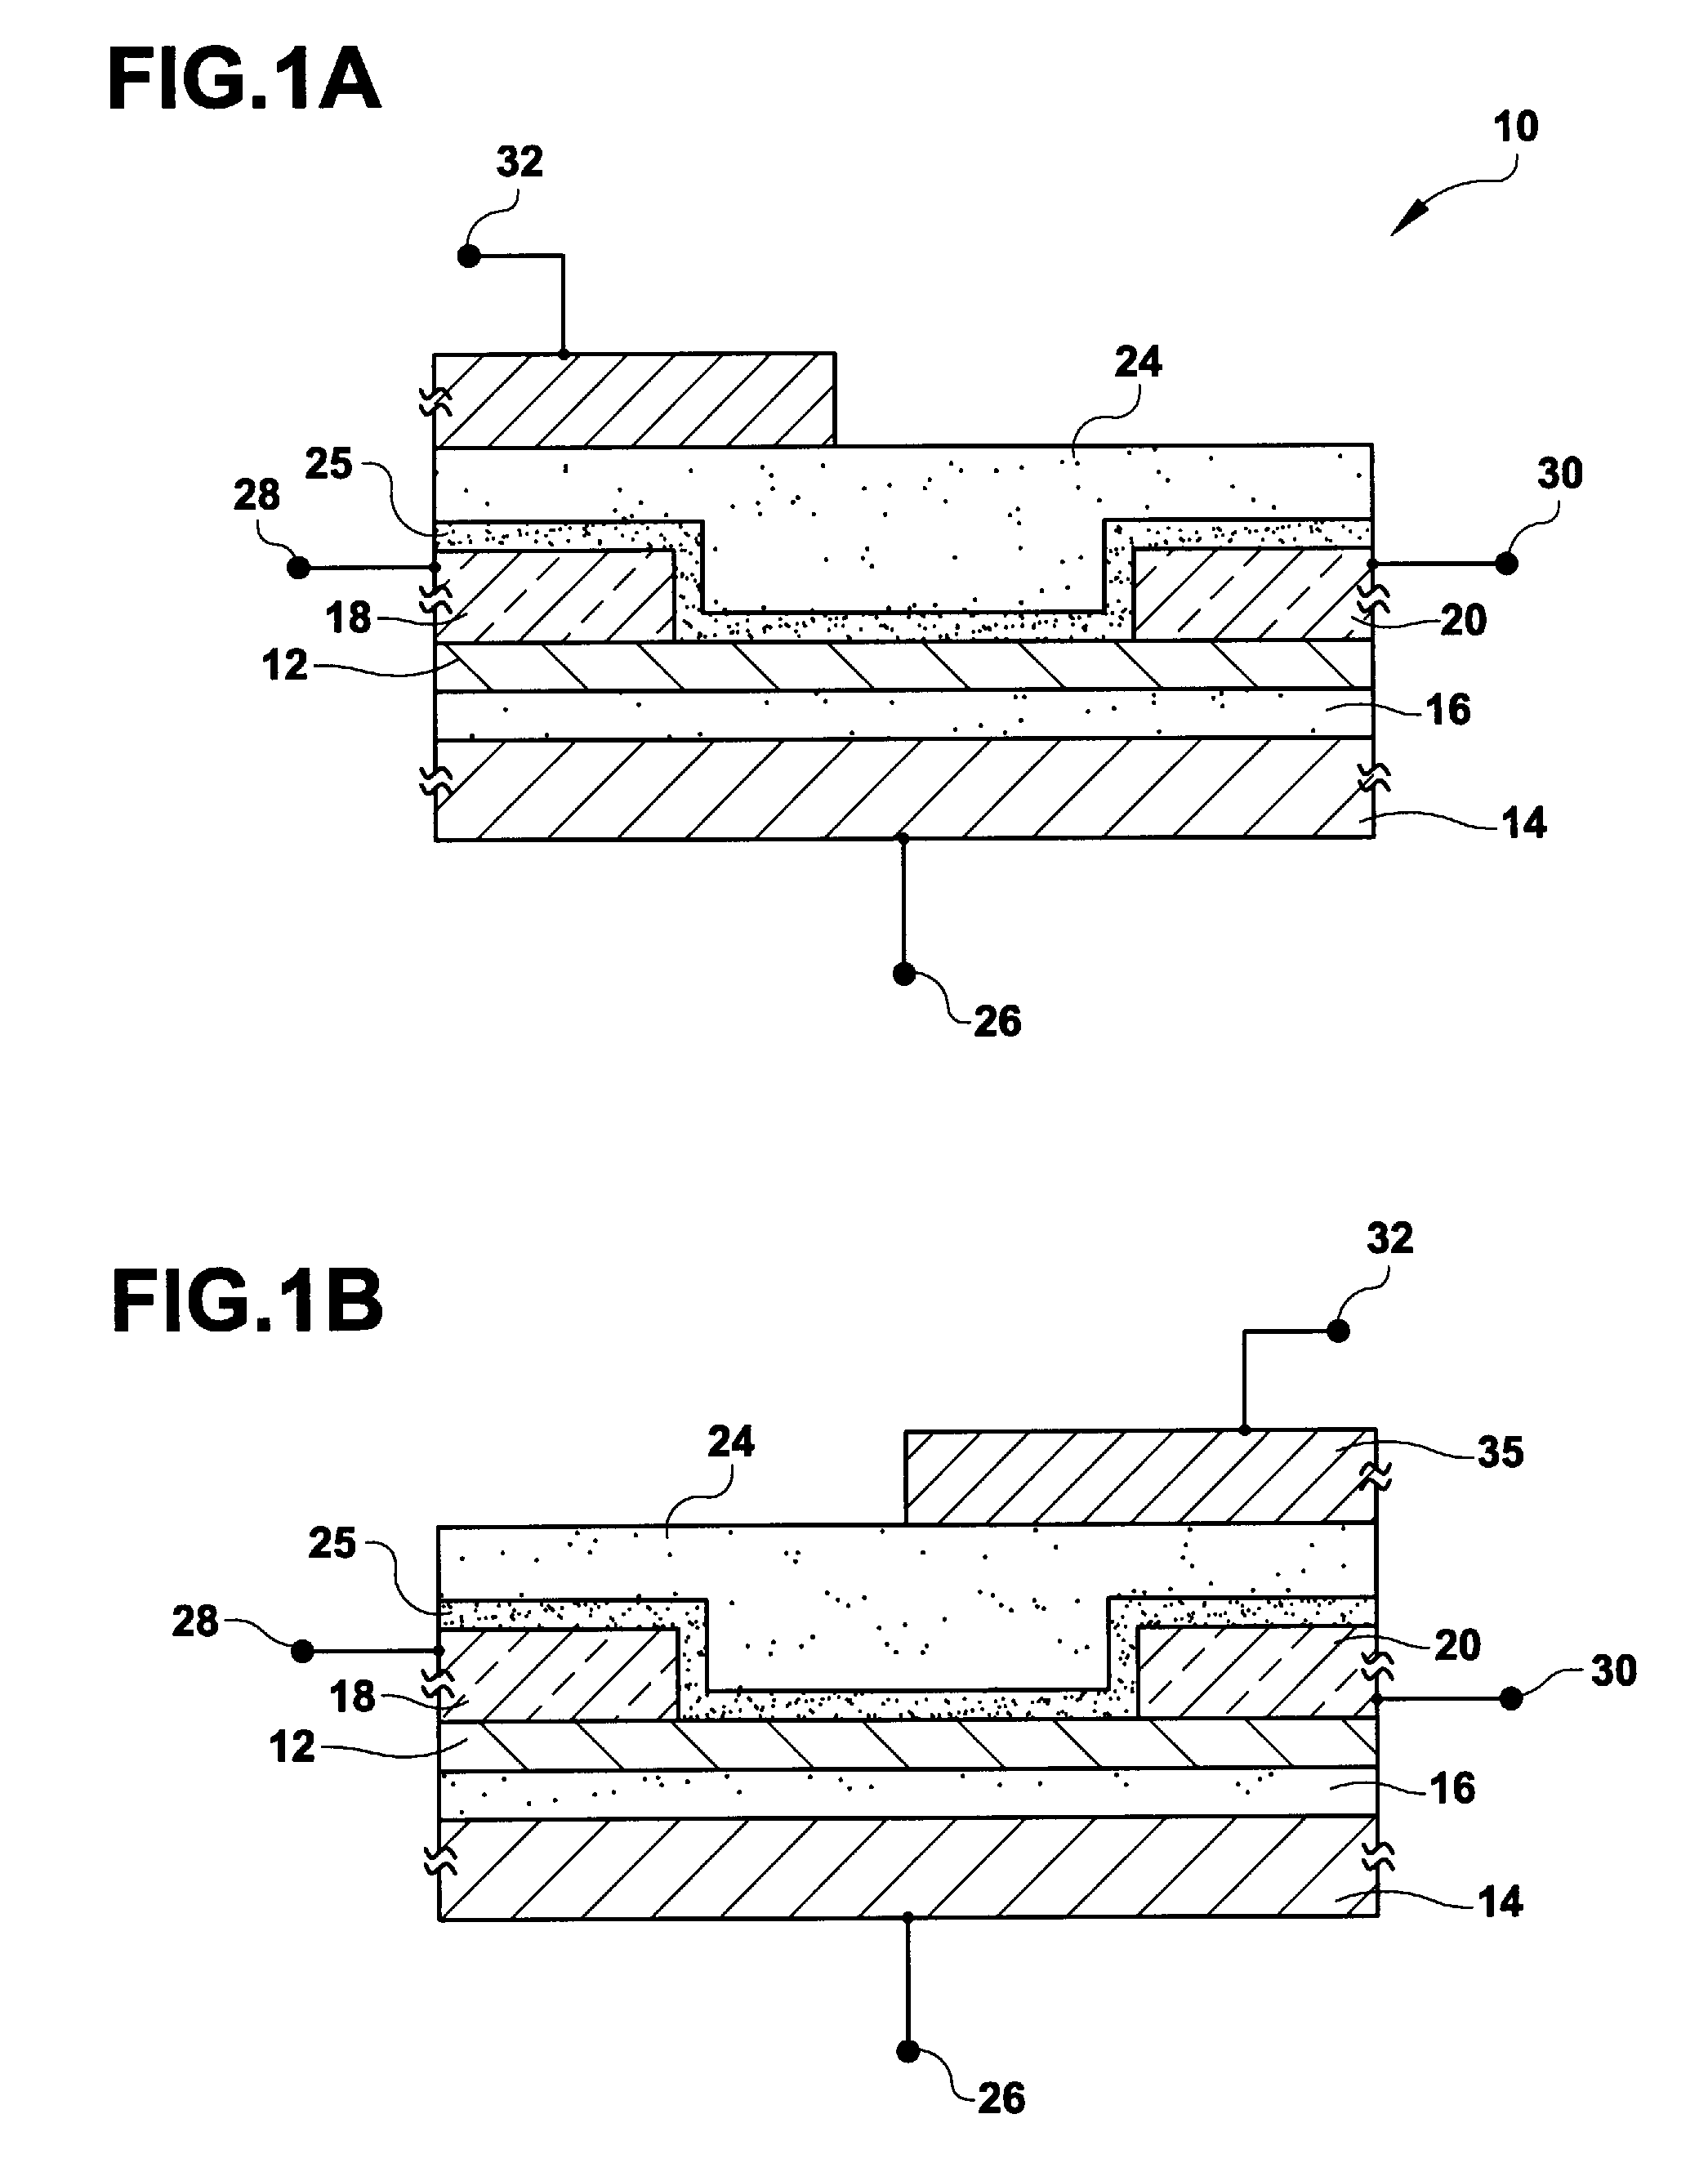 Microfabrication of Carbon-based Devices Such as Gate-Controlled Graphene Devices